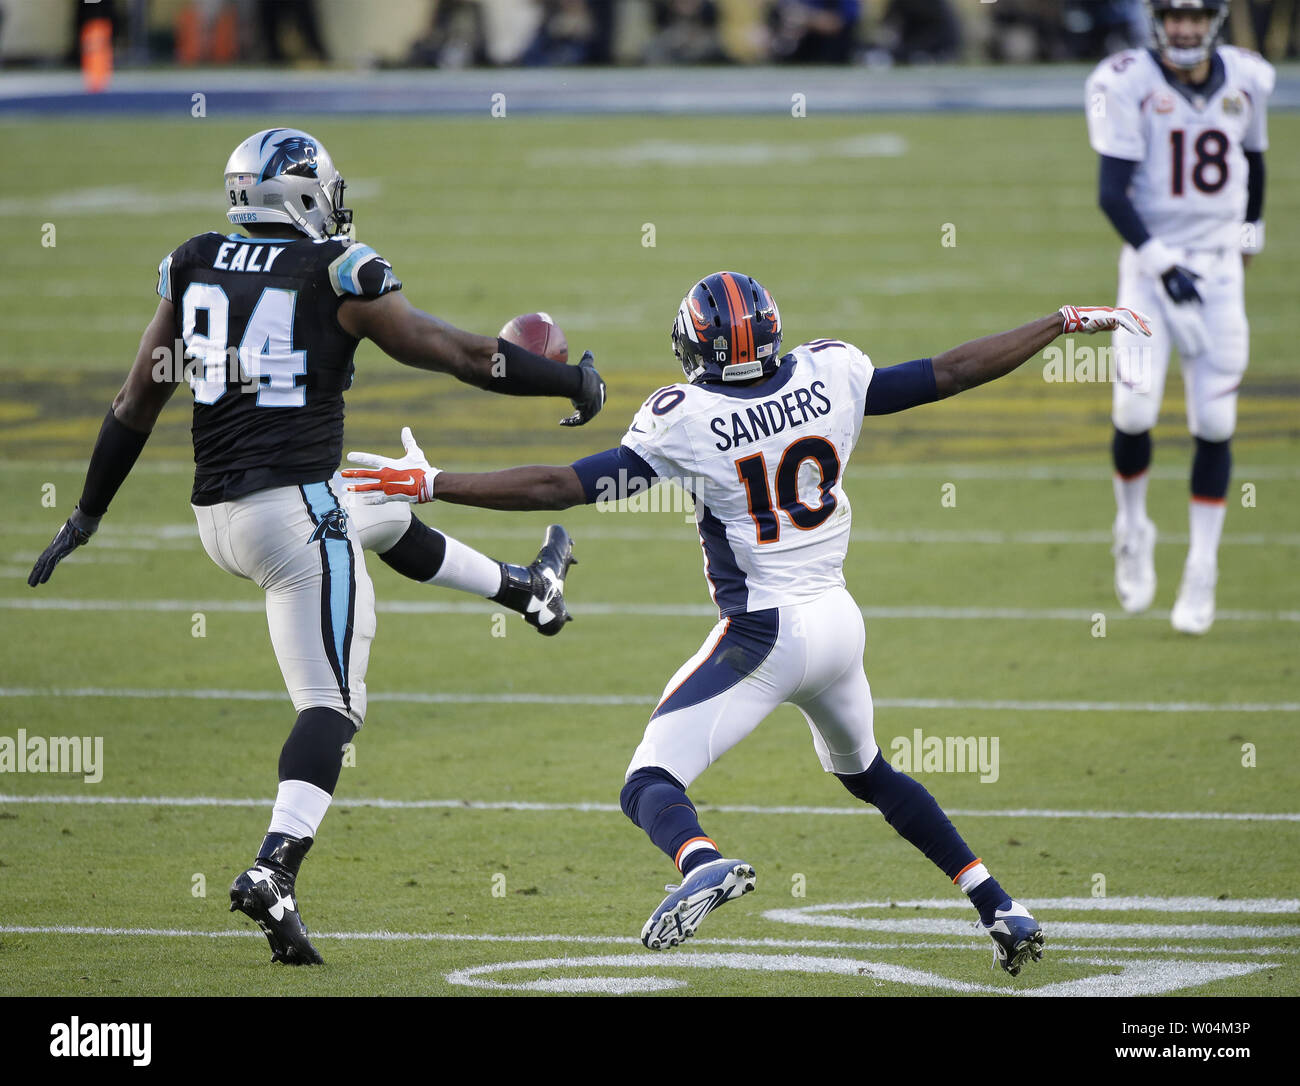 Carolina Panthers defensive end Kony Ealy (94) uses his leg to deflect and intercept a pass intended for Denver Broncos Emmanuel Sanders (10) in the second quarter during Super Bowl 50 at Levi's Stadium in Santa Clara, California on February 7, 2016.    Photo by John Angelillo/UPI Stock Photo